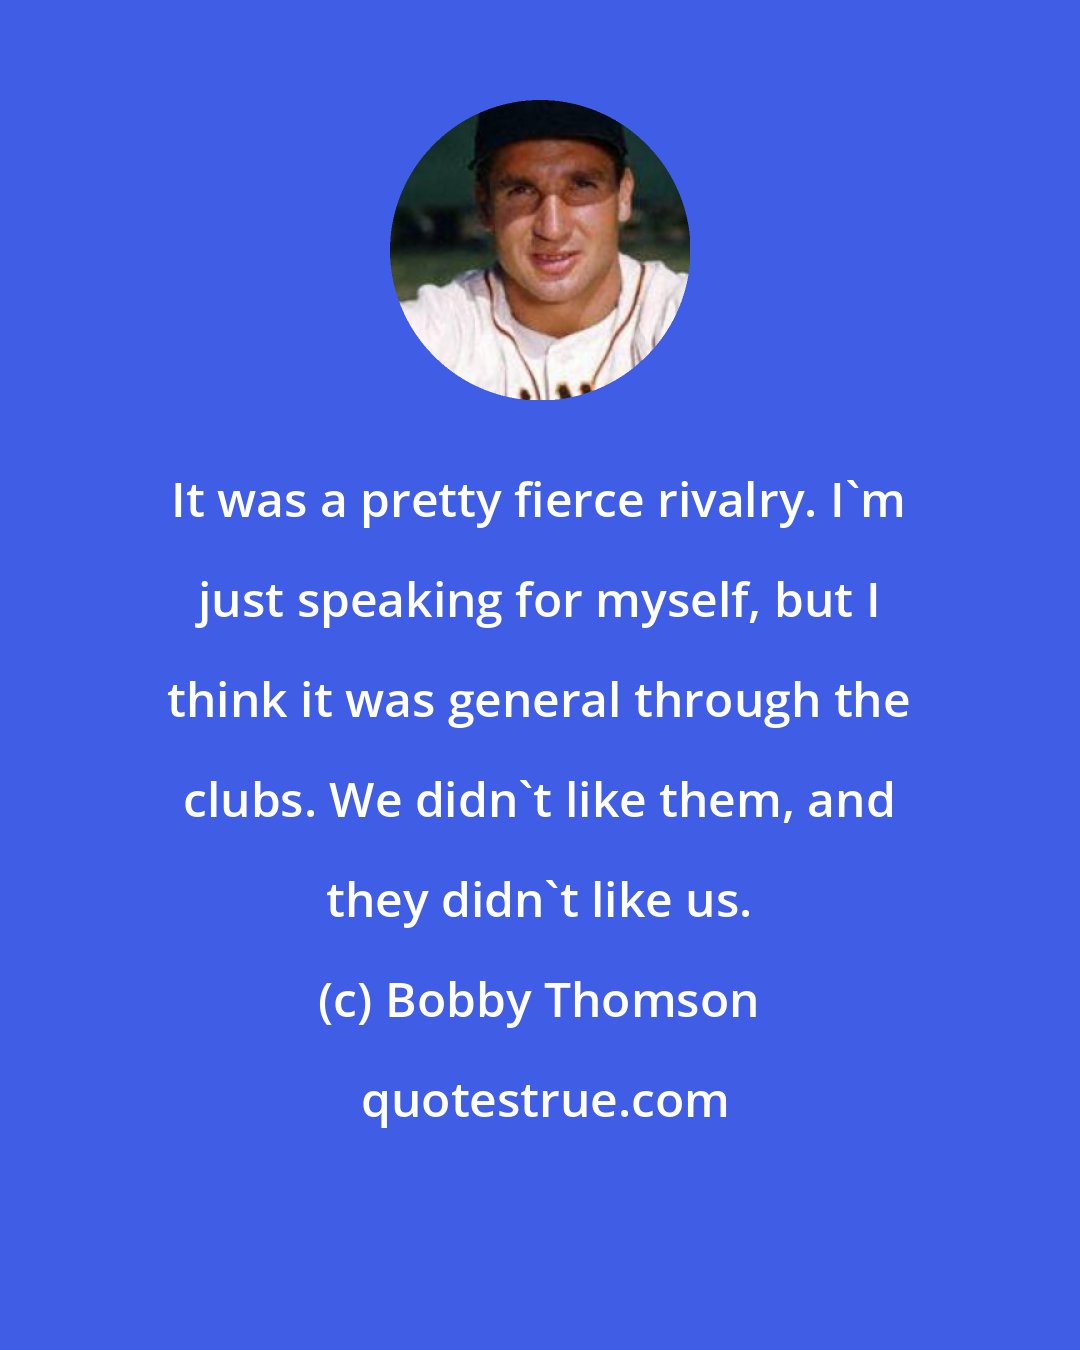 Bobby Thomson: It was a pretty fierce rivalry. I'm just speaking for myself, but I think it was general through the clubs. We didn't like them, and they didn't like us.